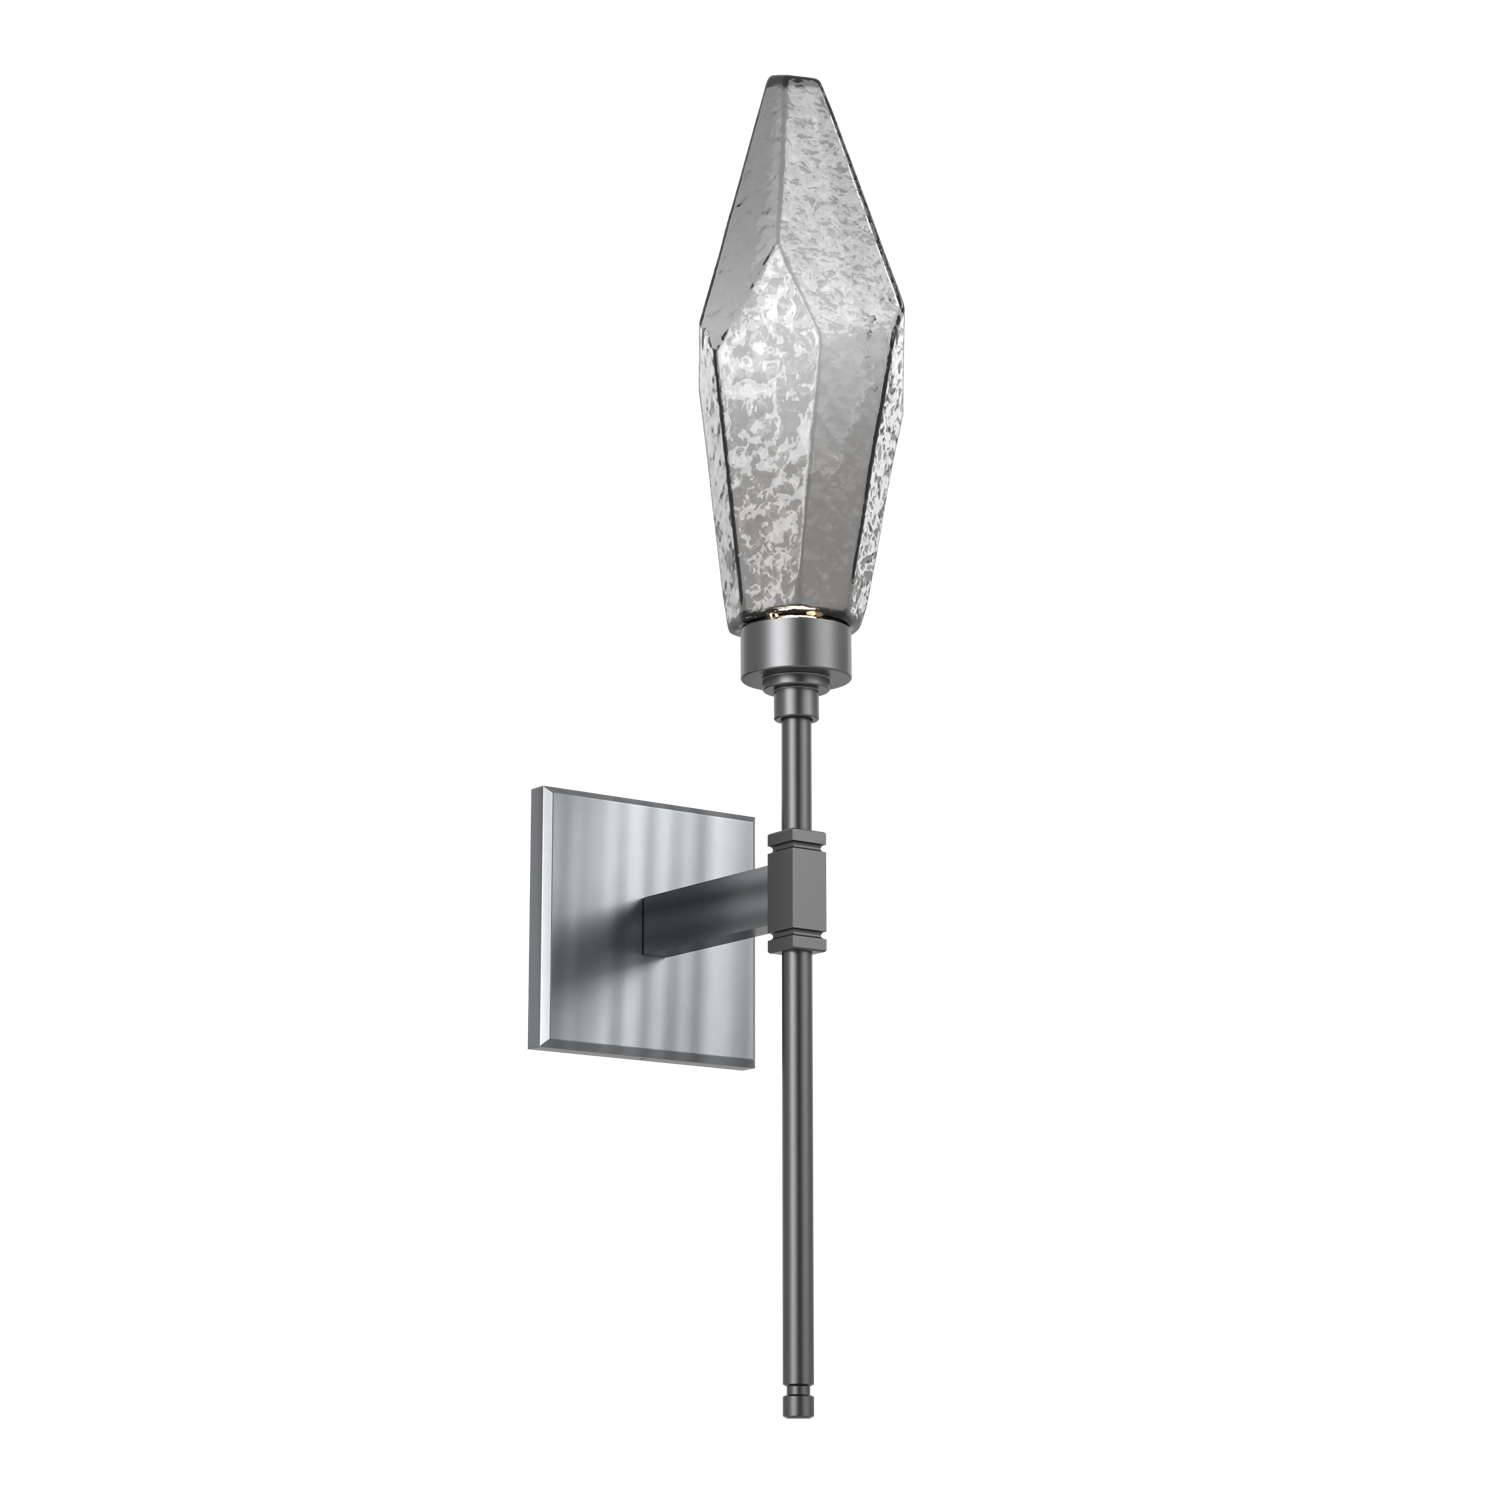 IDB0050-07-GM-CS-Hammerton-Studio-Rock-Crystal-belvedere-wall-sconce-with-gunmetal-finish-and-chilled-smoke-glass-shades-and-LED-lamping